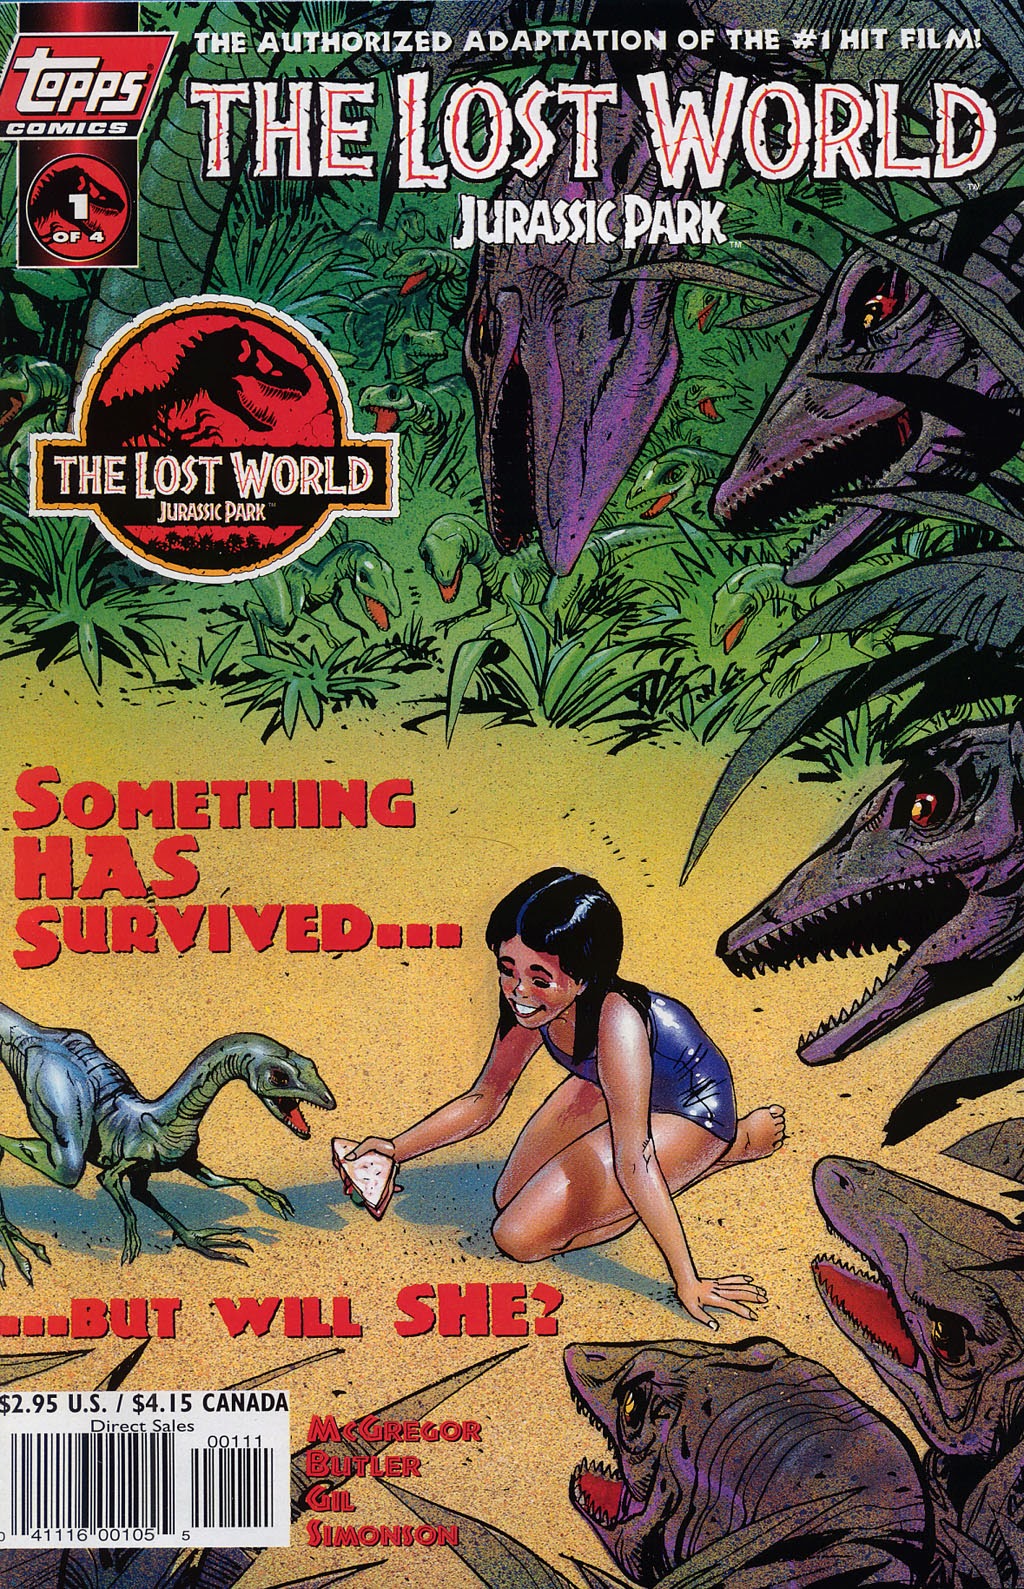 The Lost World Jurassic Park Issue 1 | Read The Lost World Jurassic Park  Issue 1 comic online in high quality. Read Full Comic online for free -  Read comics online in